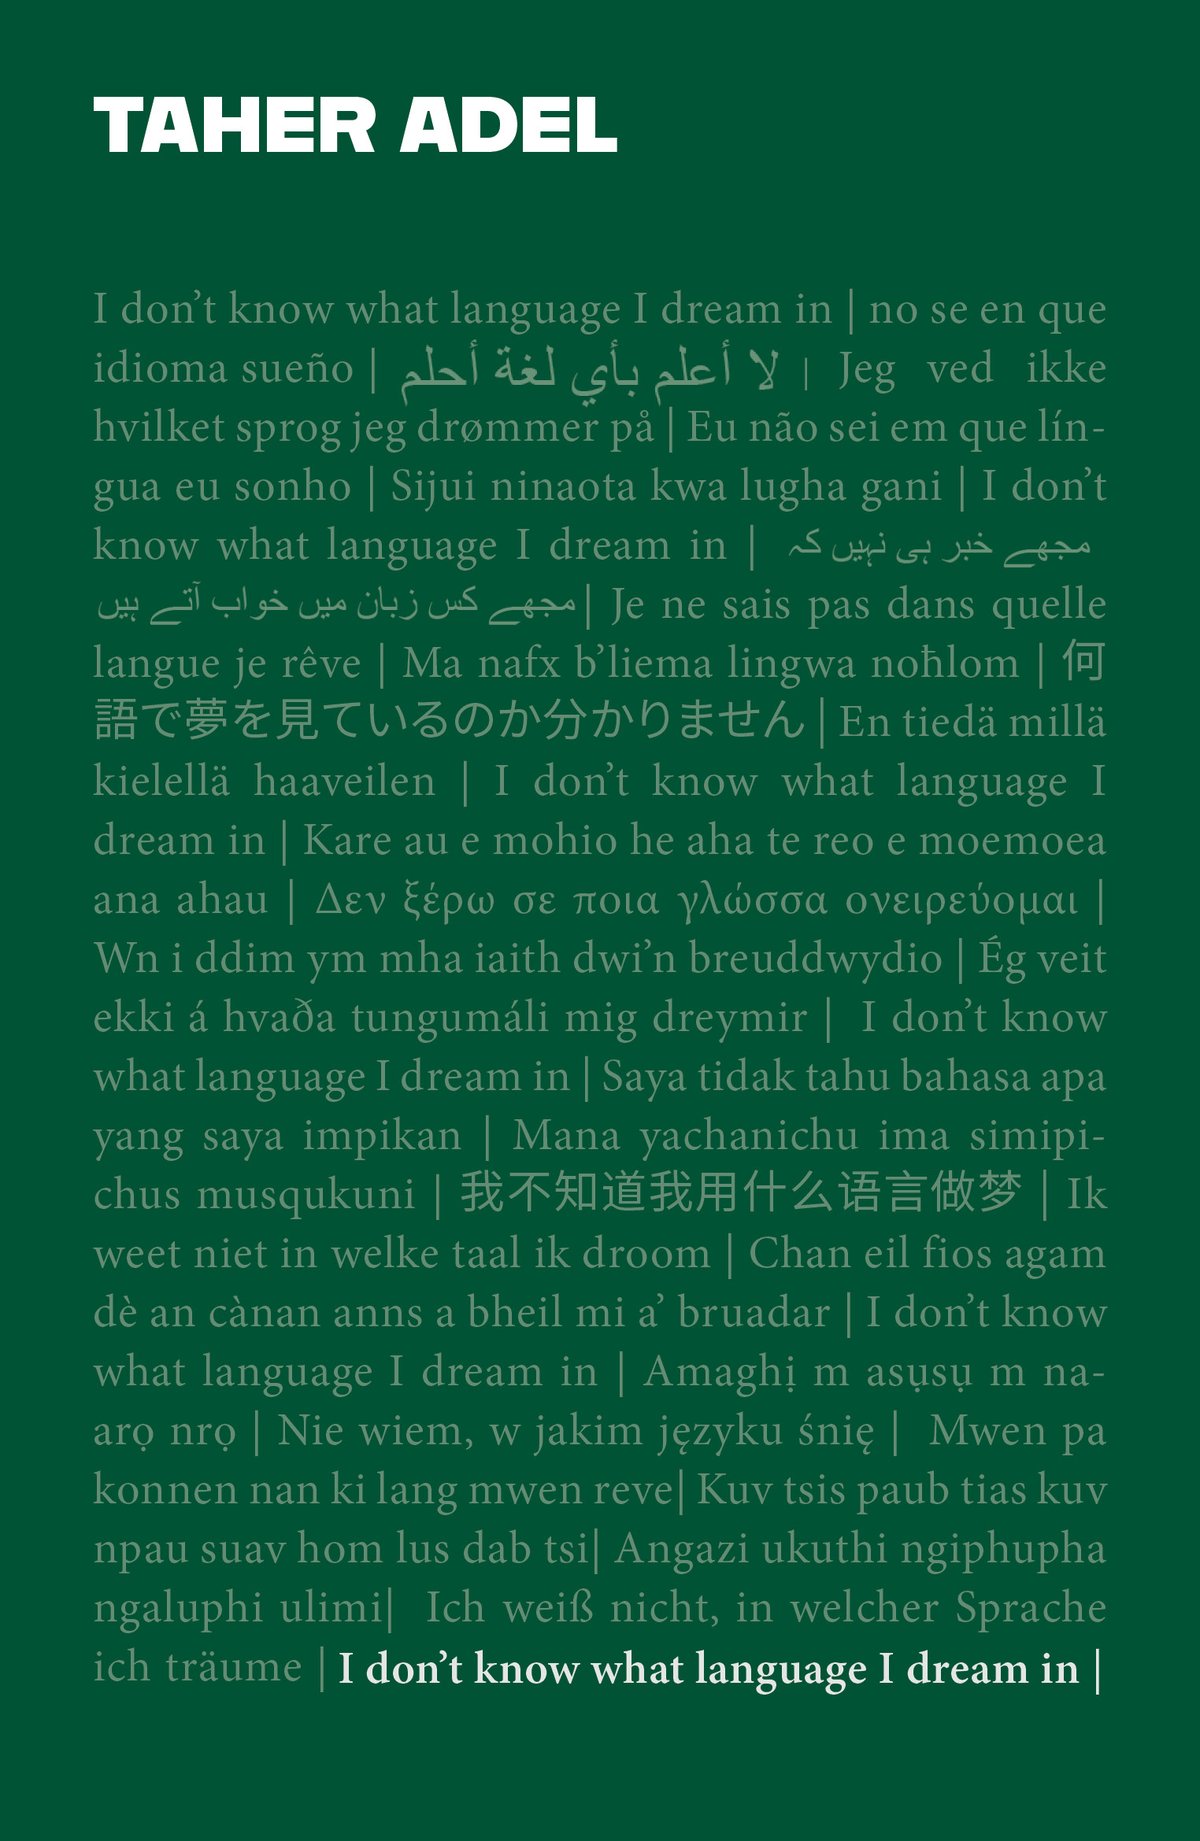 Image of I Don't Know What Language I Dream In by Taher Adel 